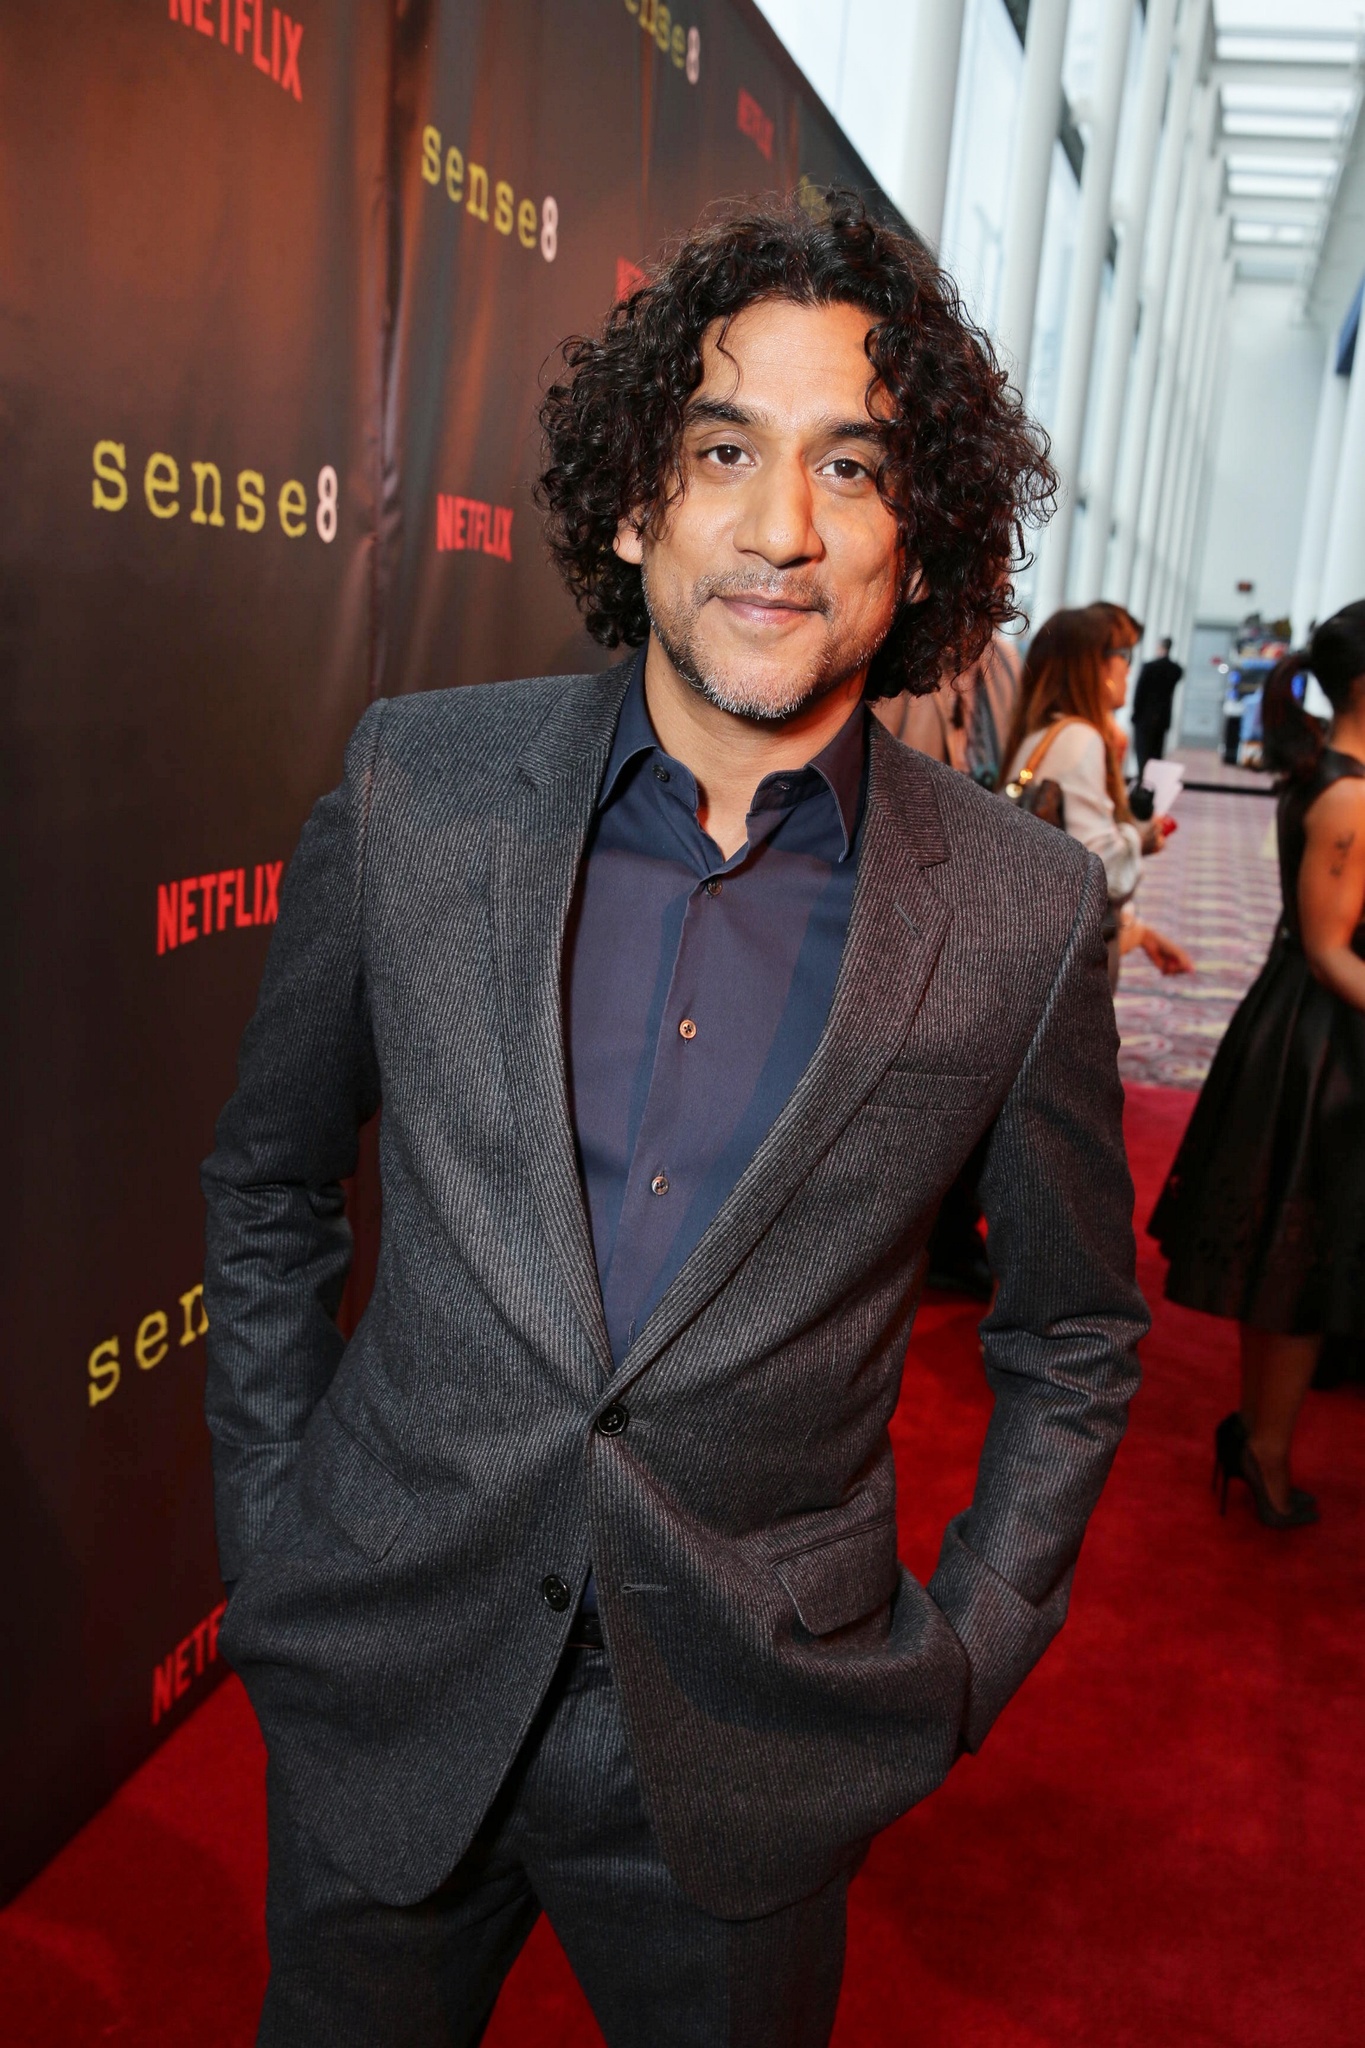 Naveen Andrews at event of Sense8 (2015)